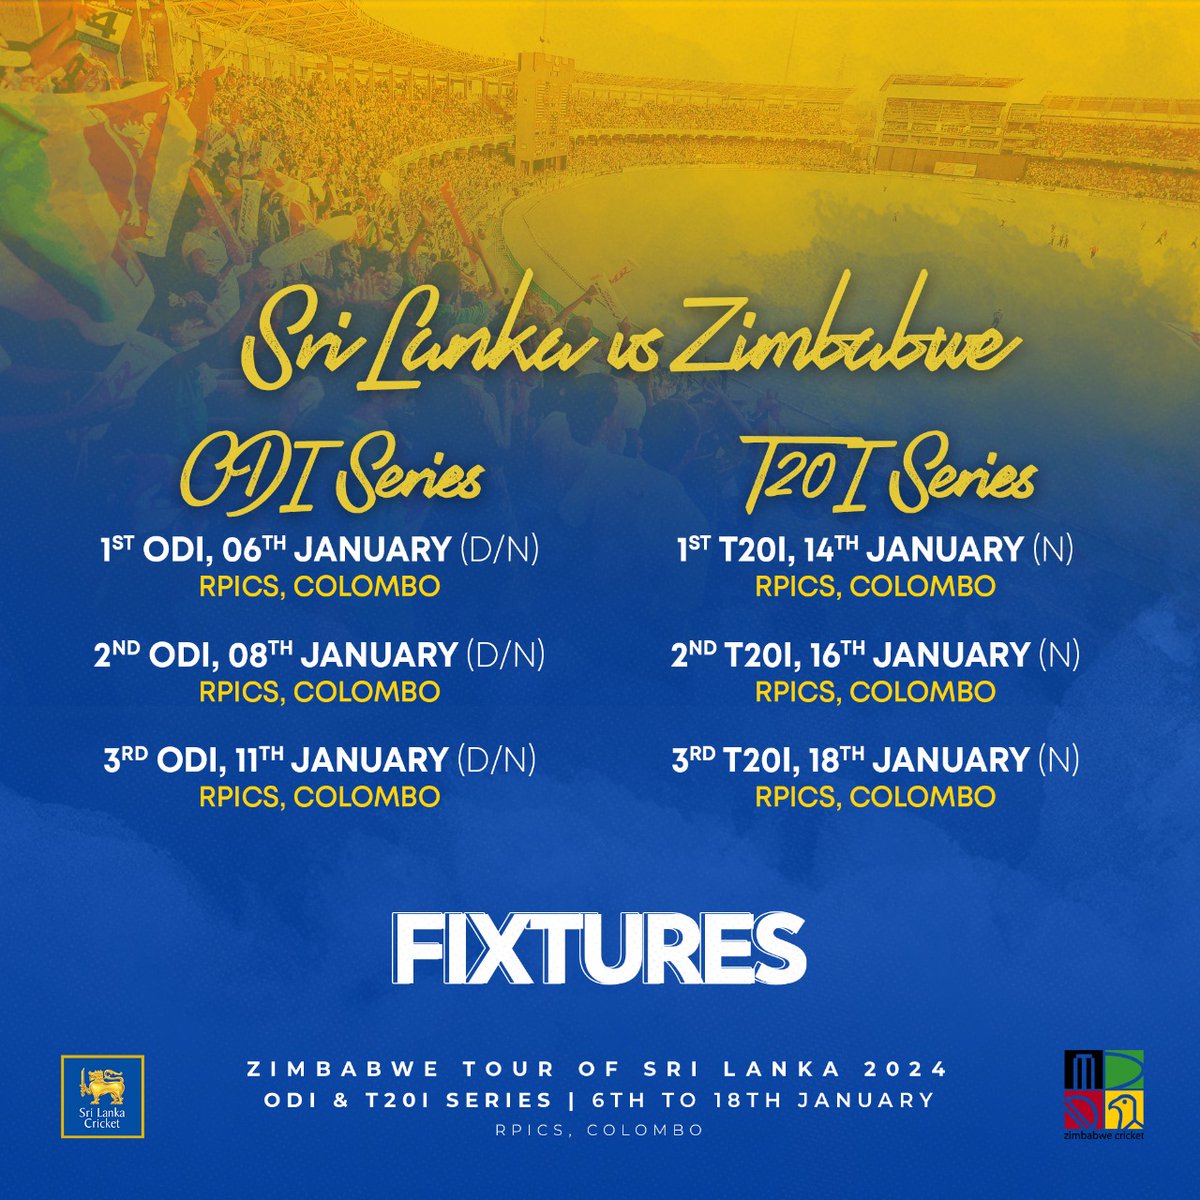 The Zimbabwe national men’s team will tour Sri Lanka during January 2024 for a white-ball tour consisting of three ODIs and three T20Is. The Zimbabweans will arrive in the country on January 3, 2024. #SLvZIM